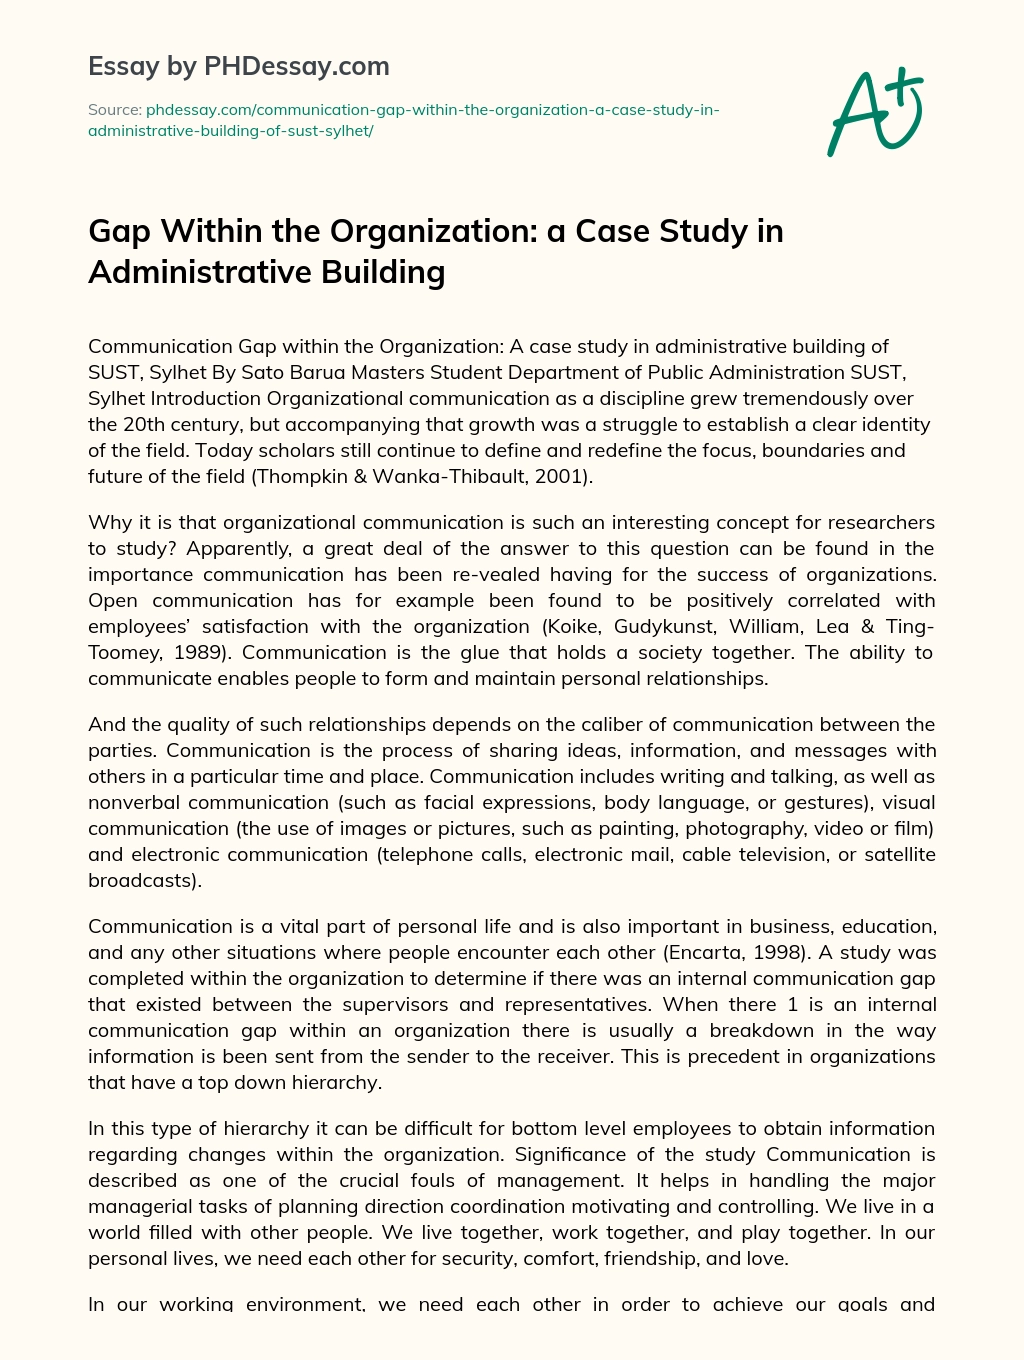 Gap Within the Organization: a Case Study in Administrative Building essay